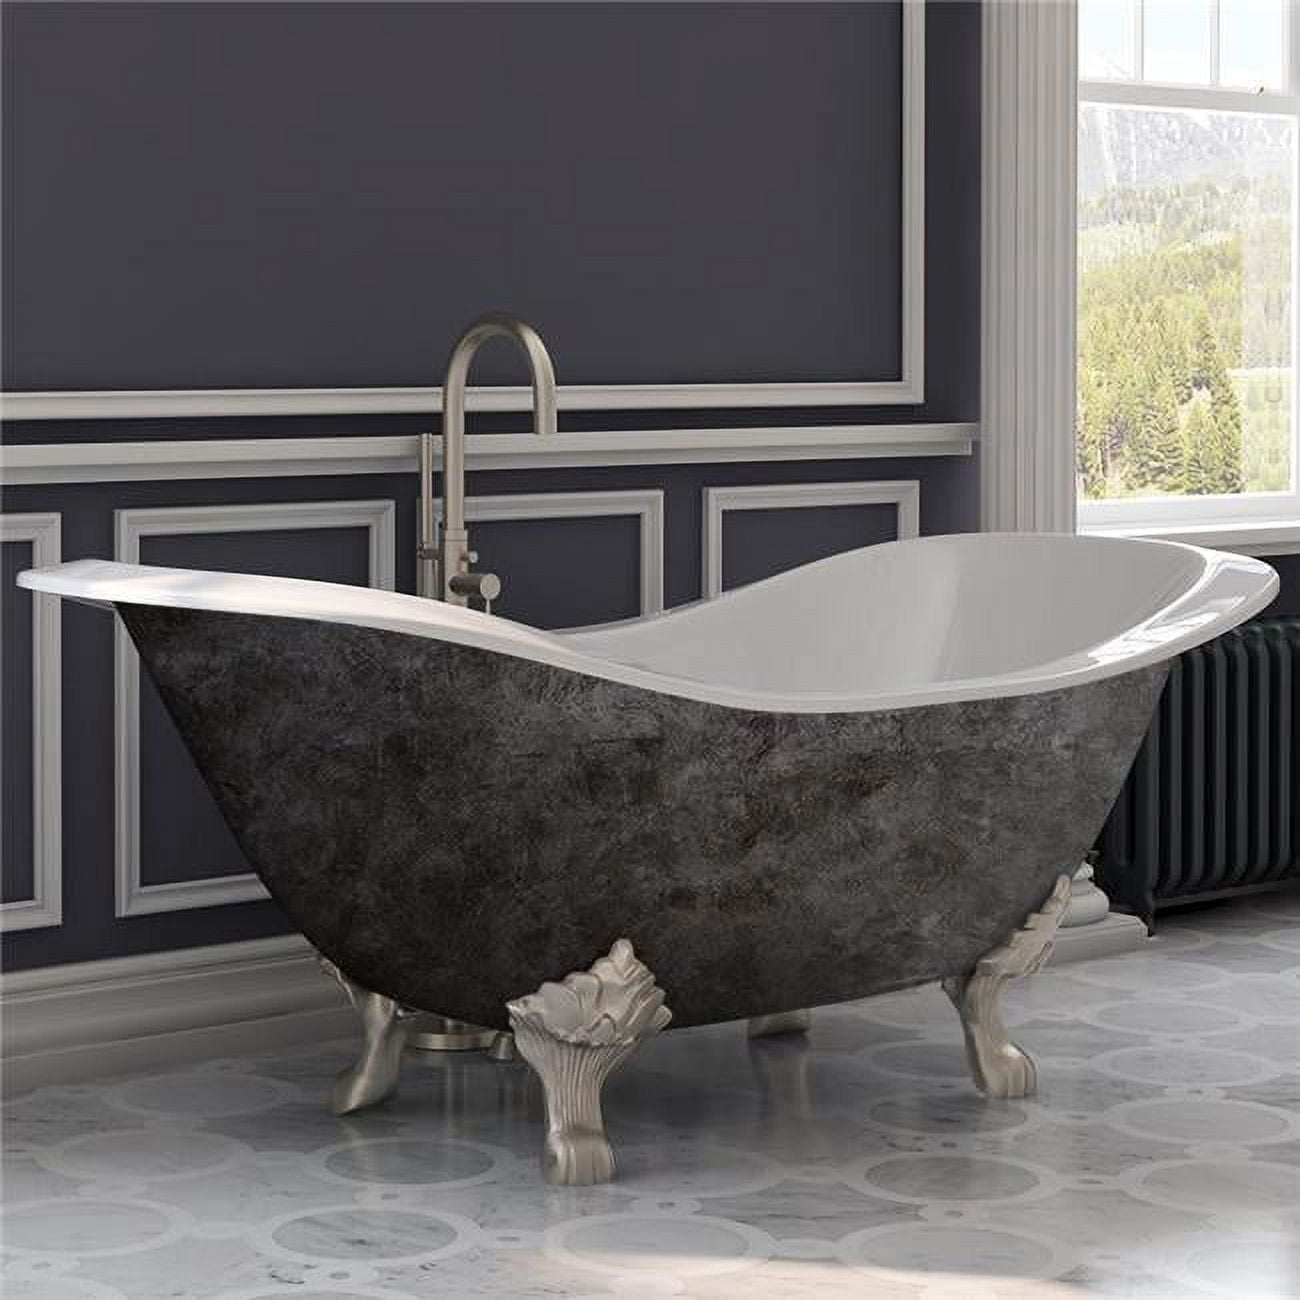 Des-nh-bn-sp 71 In. Scorched Platinum Cast Iron Double Slipper Tub, Brushed Nickel Lions Paw Feet, No Faucet Holes